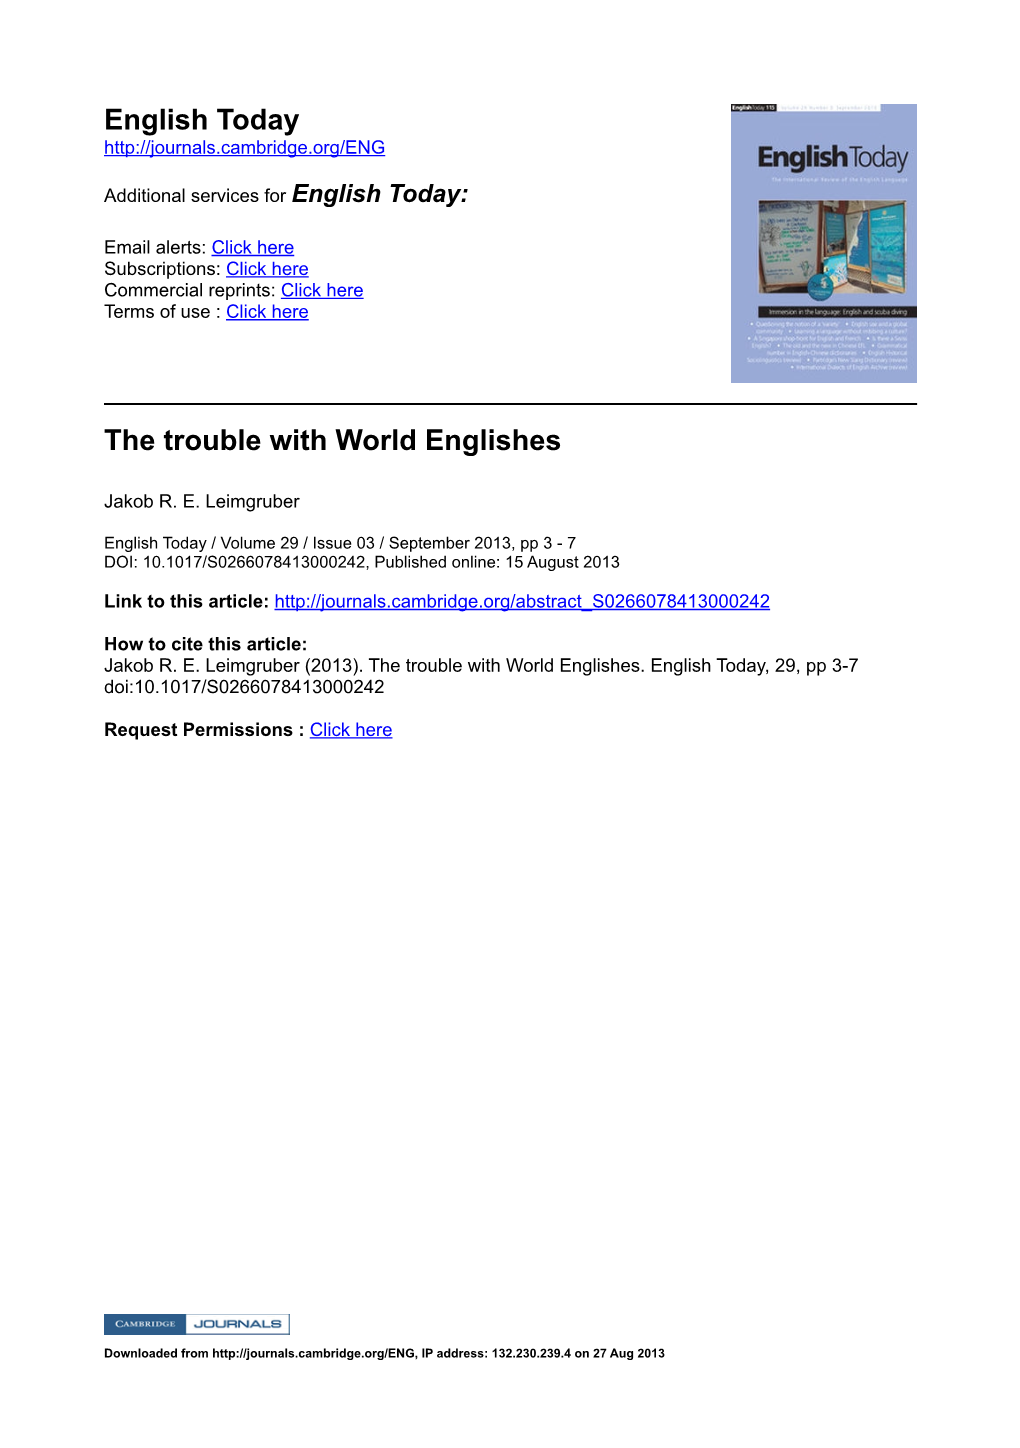 English Today the Trouble with World Englishes